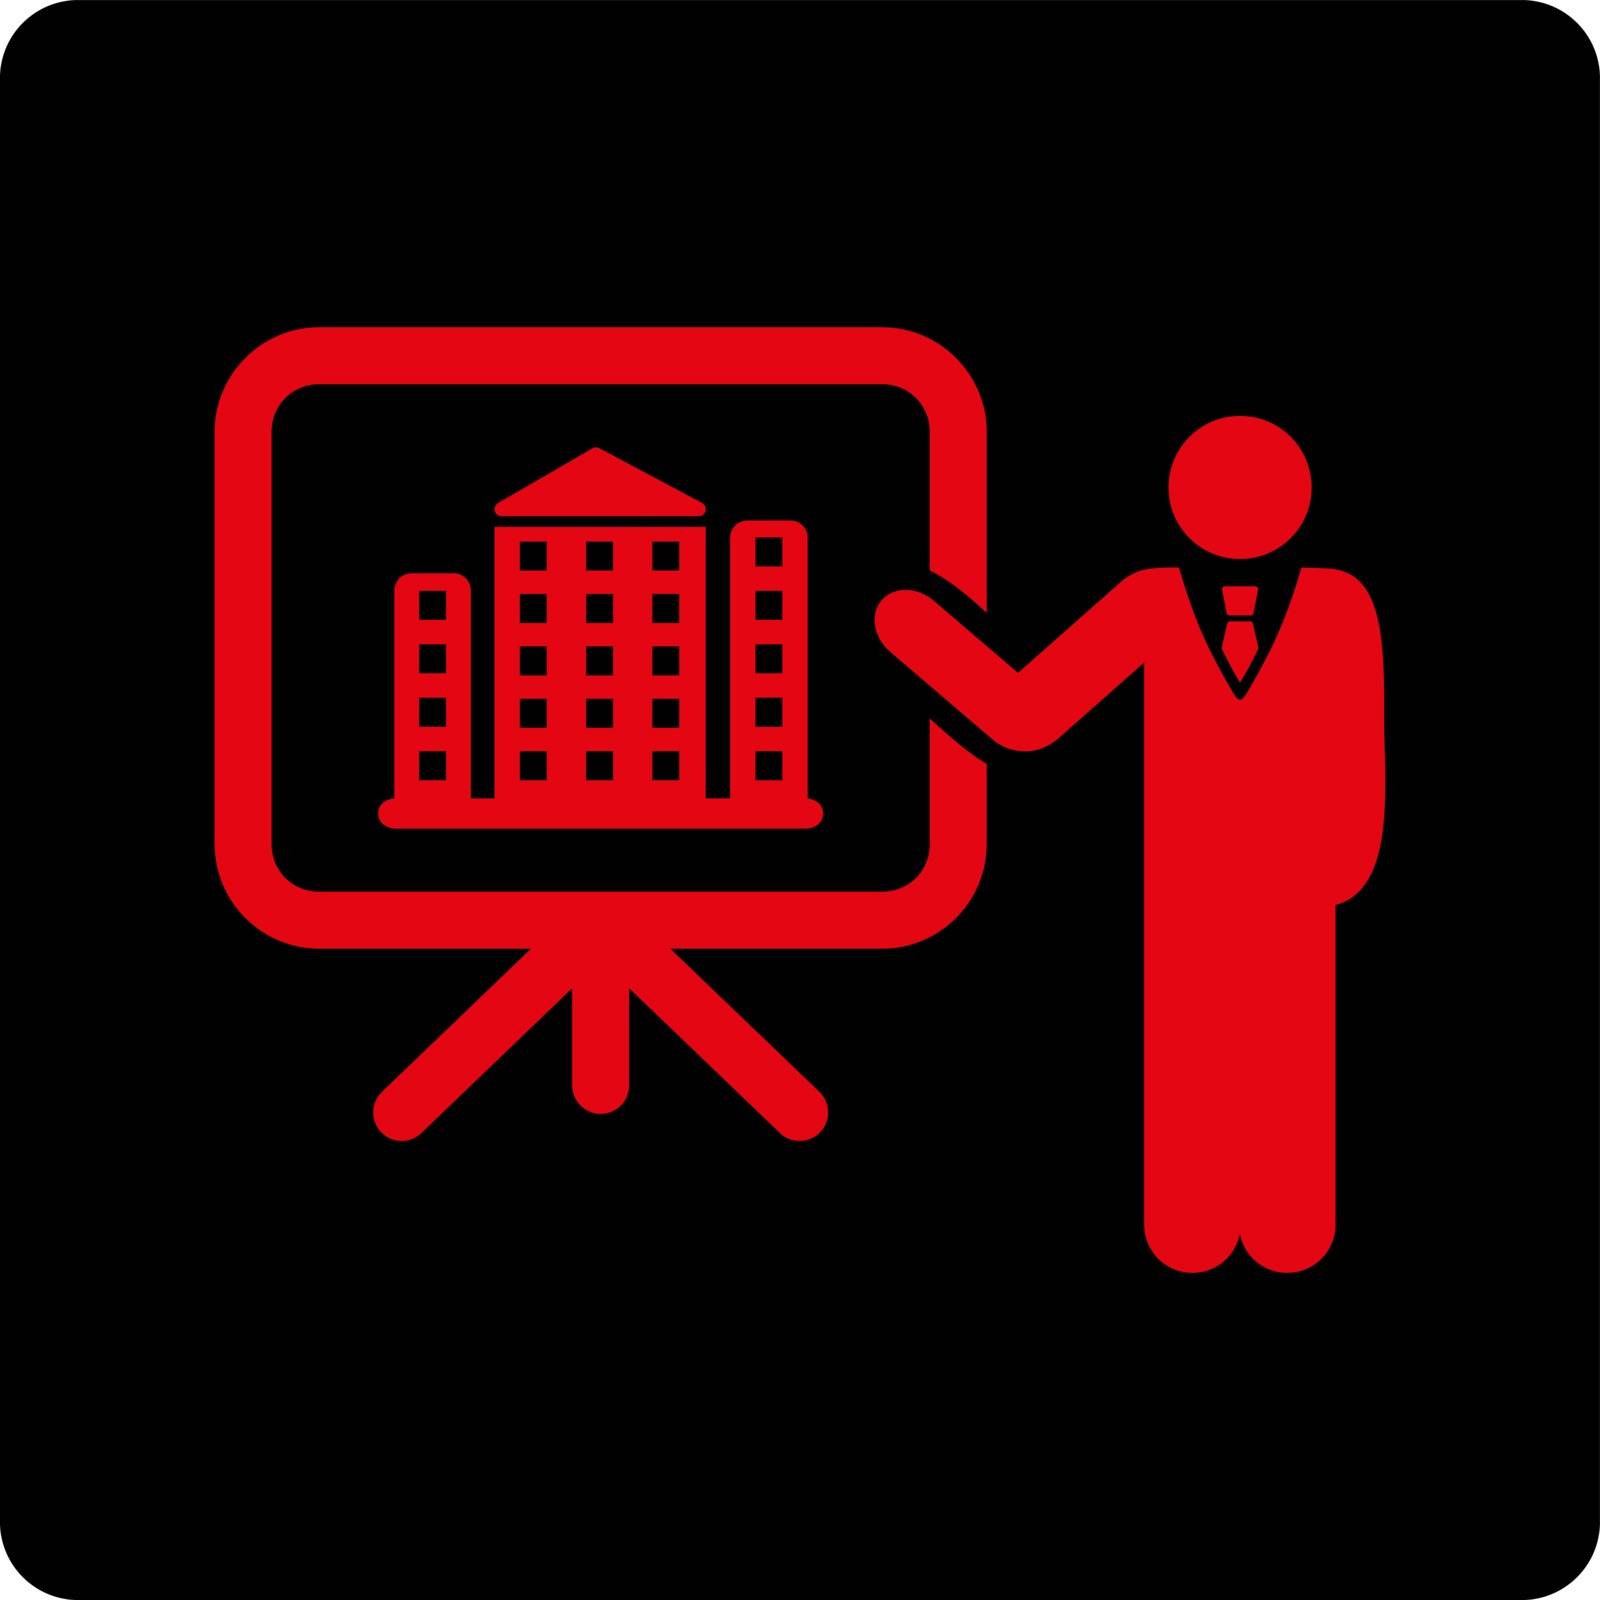 Home project icon. Vector style is intensive red and black colors, flat rounded square button on a white background.